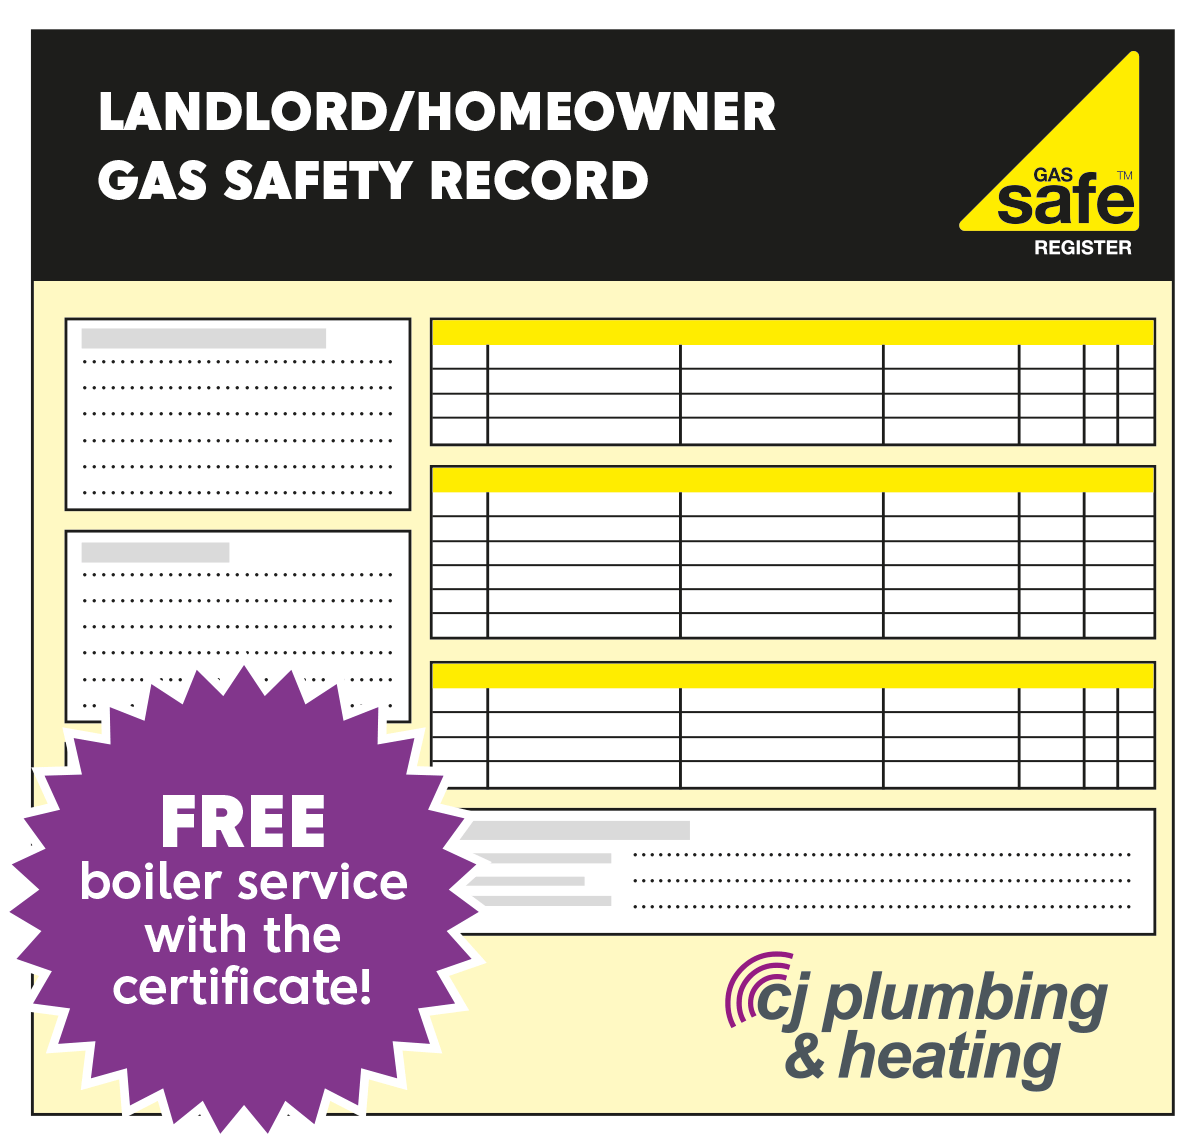 Landlord gas safety certificates around Suffolk and Essex from CJ Plumbing and Heating